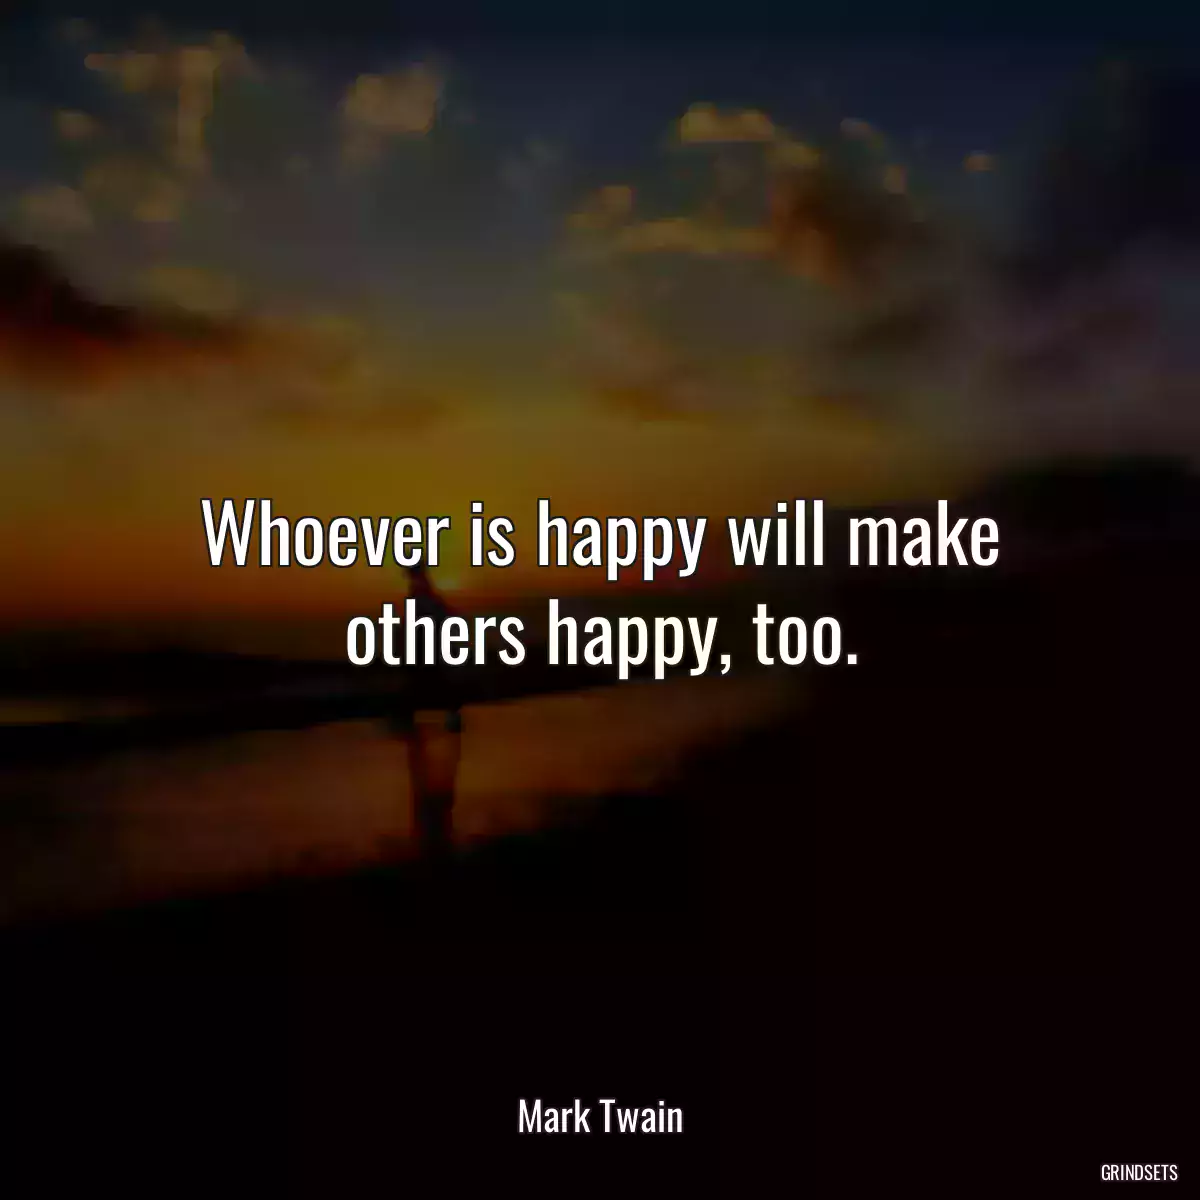 Whoever is happy will make others happy, too.